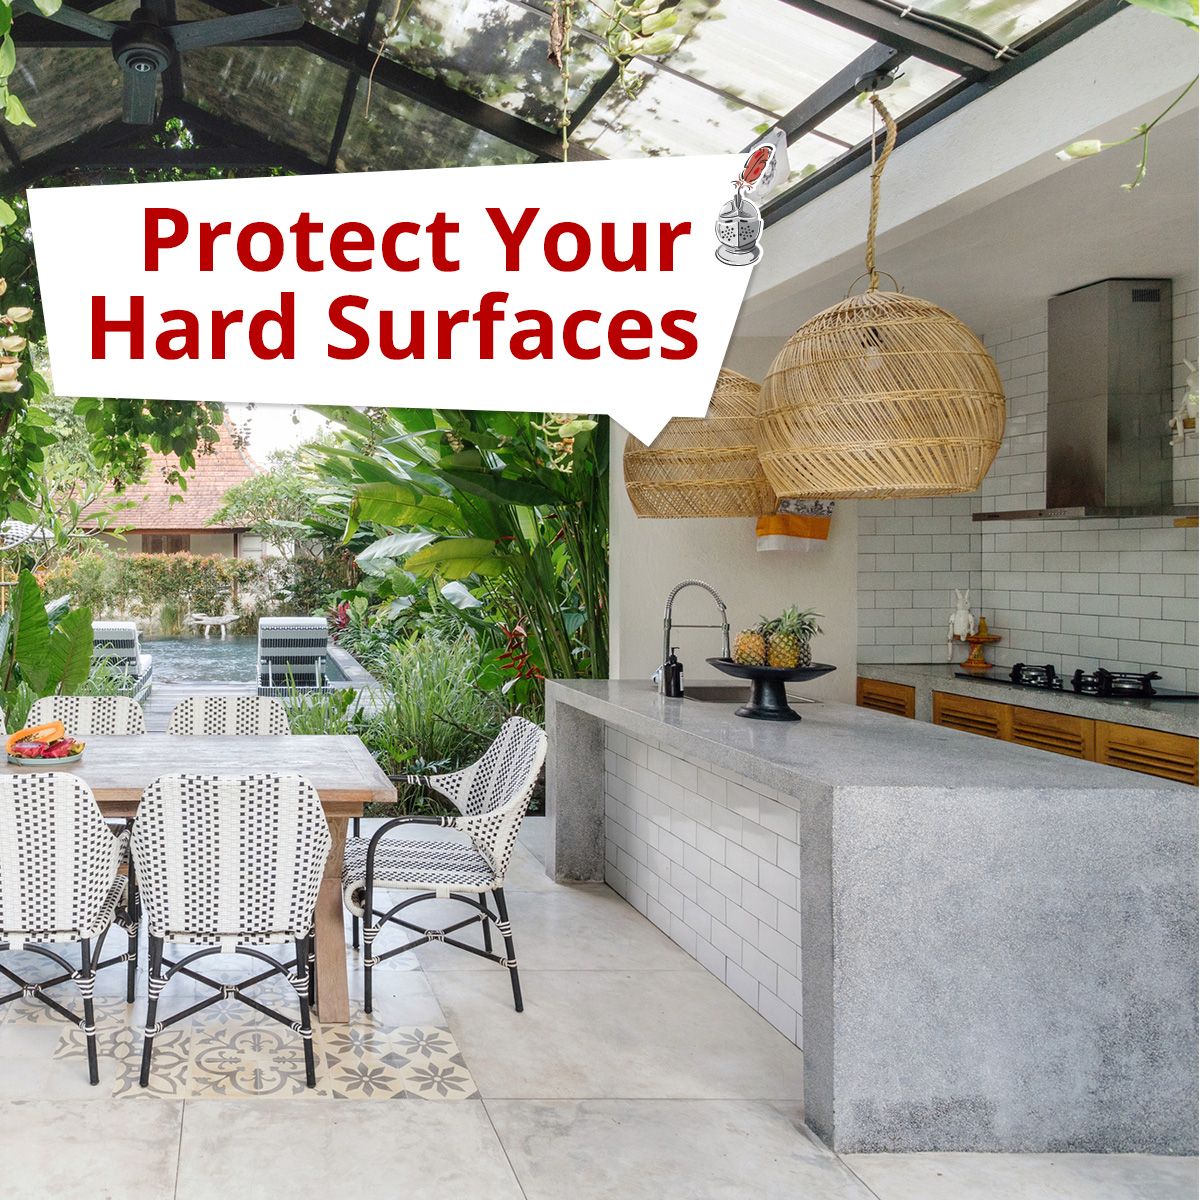 Protect Your Hard Surfaces